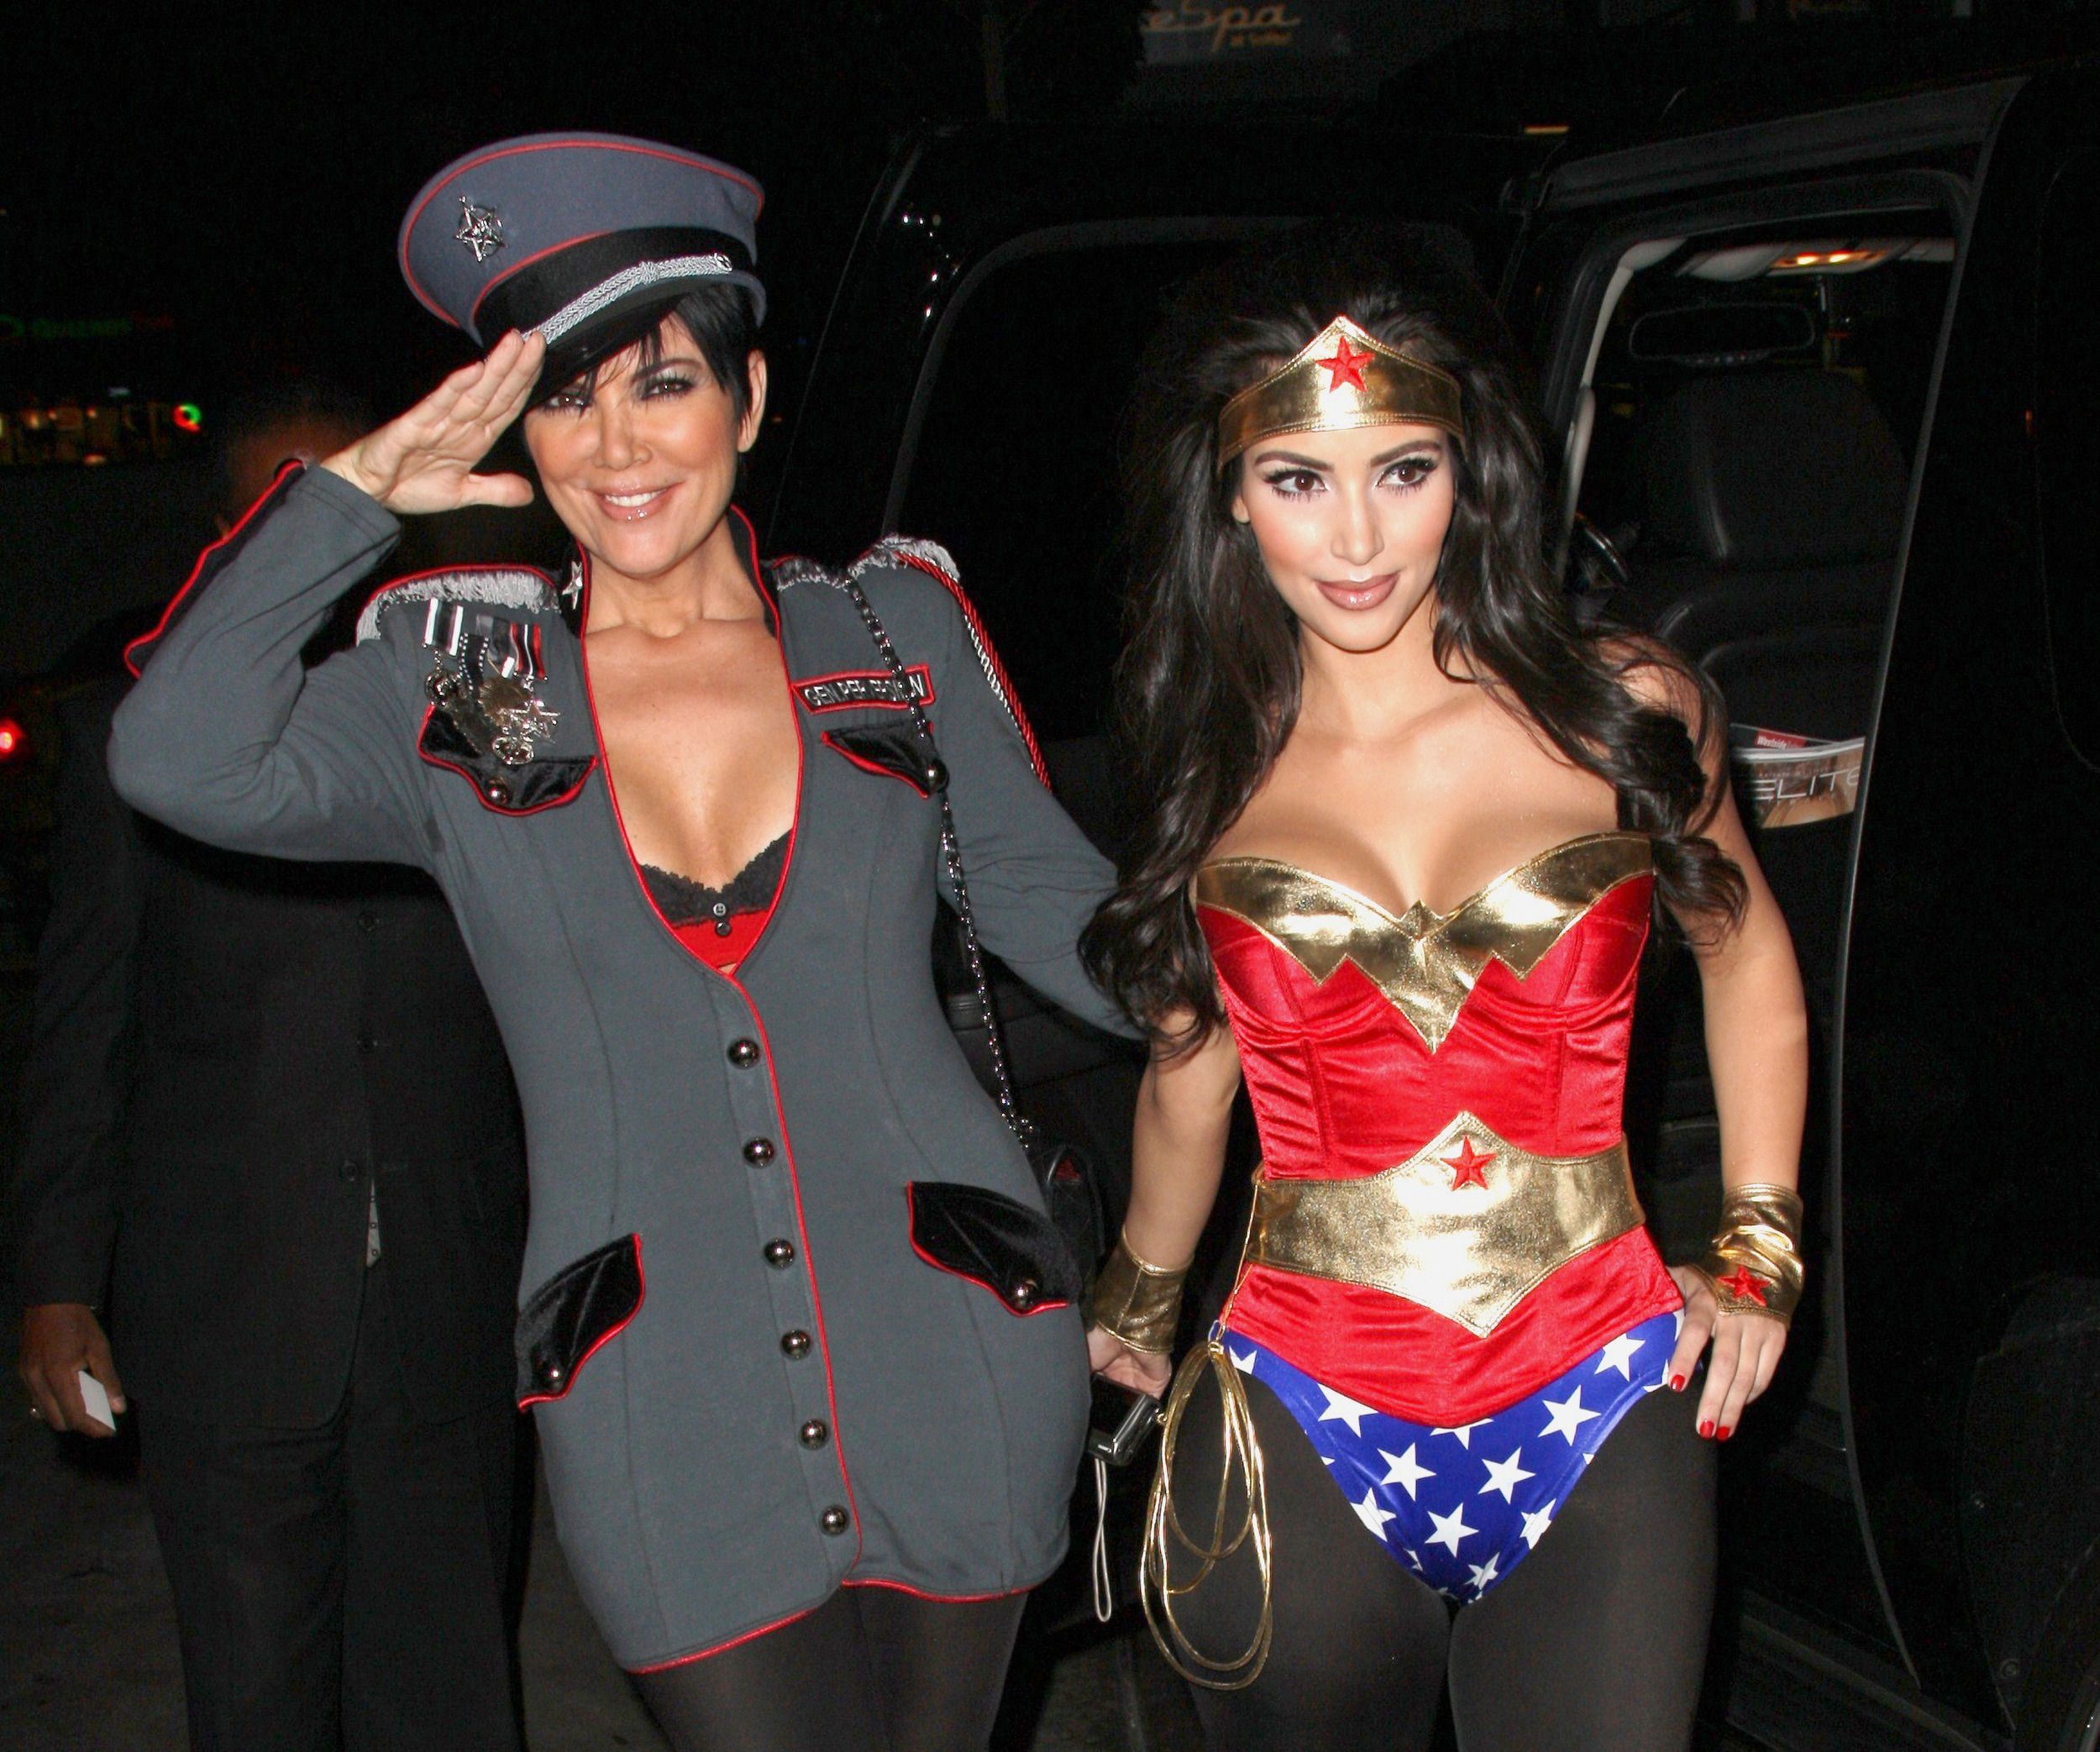 Kardashian Halloween Costumes Throughout The Years 1980s To Now